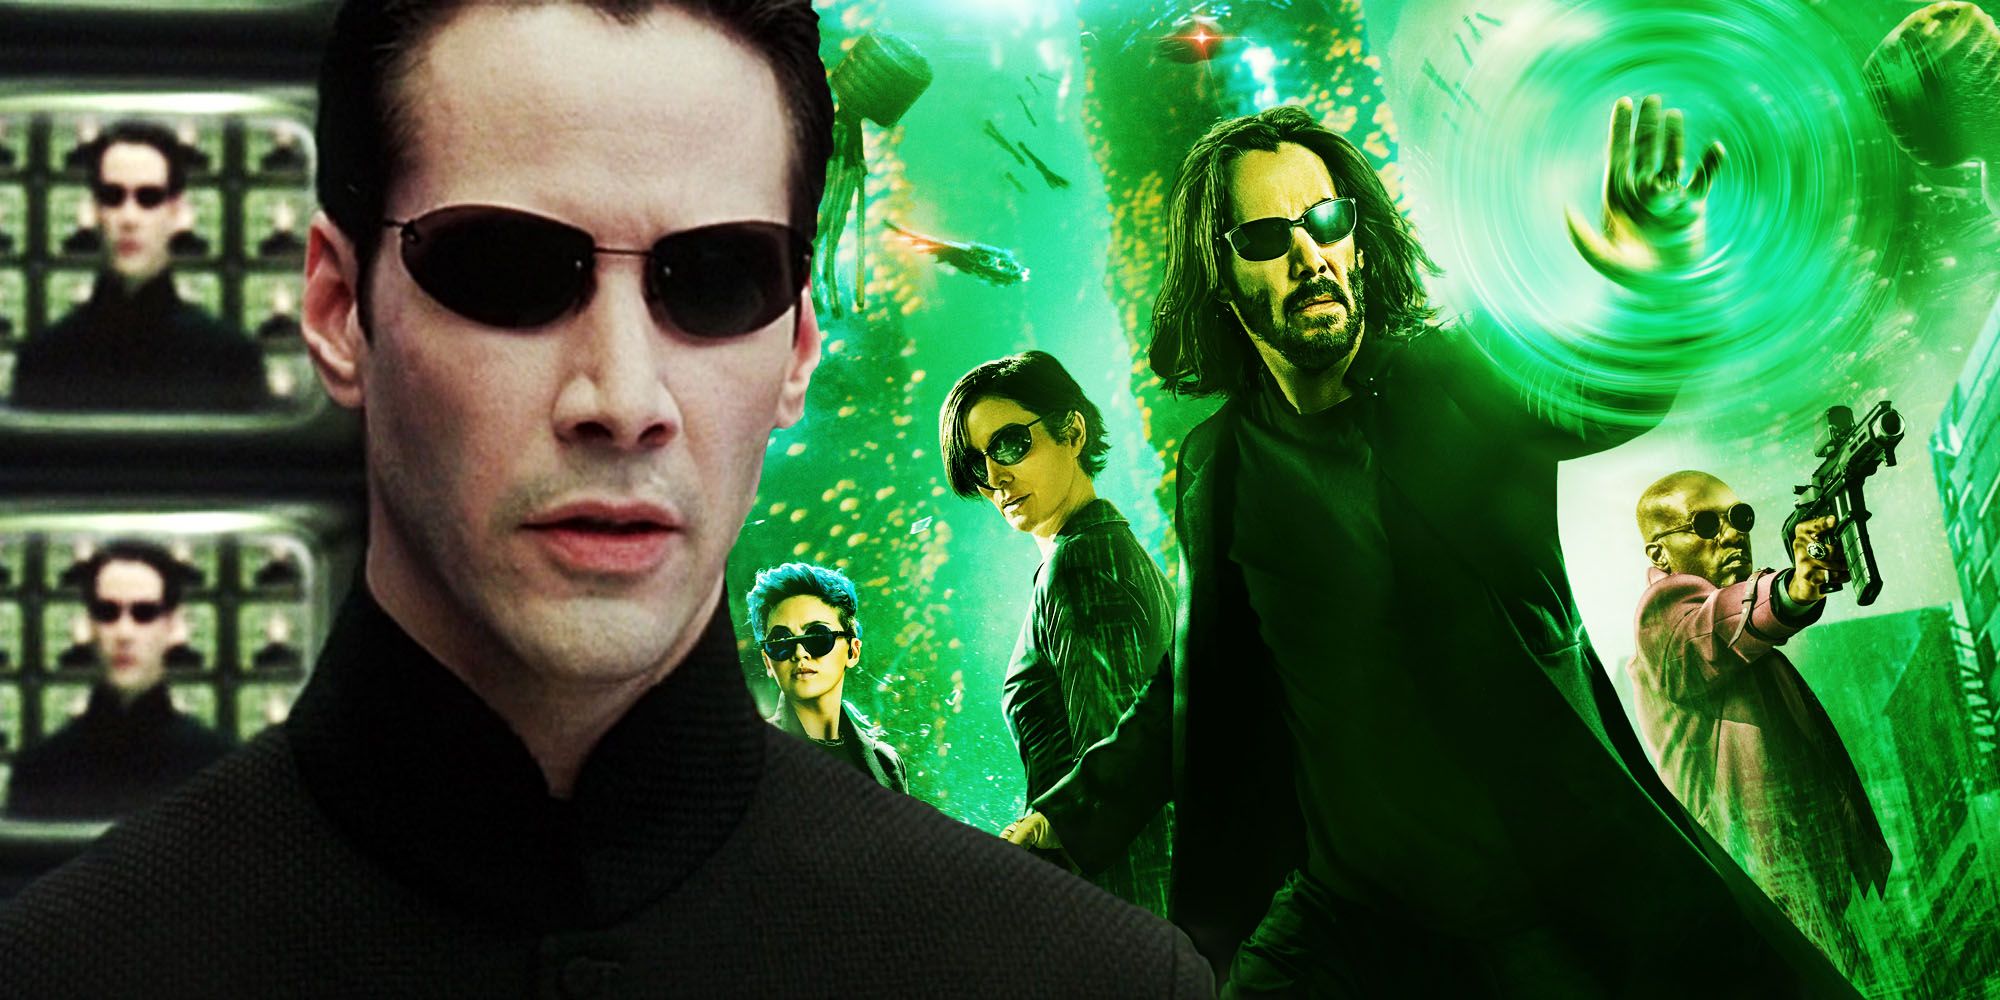 Matrix Reboot Directed By Danny Boyle Looks Perfect After The Director's New Project